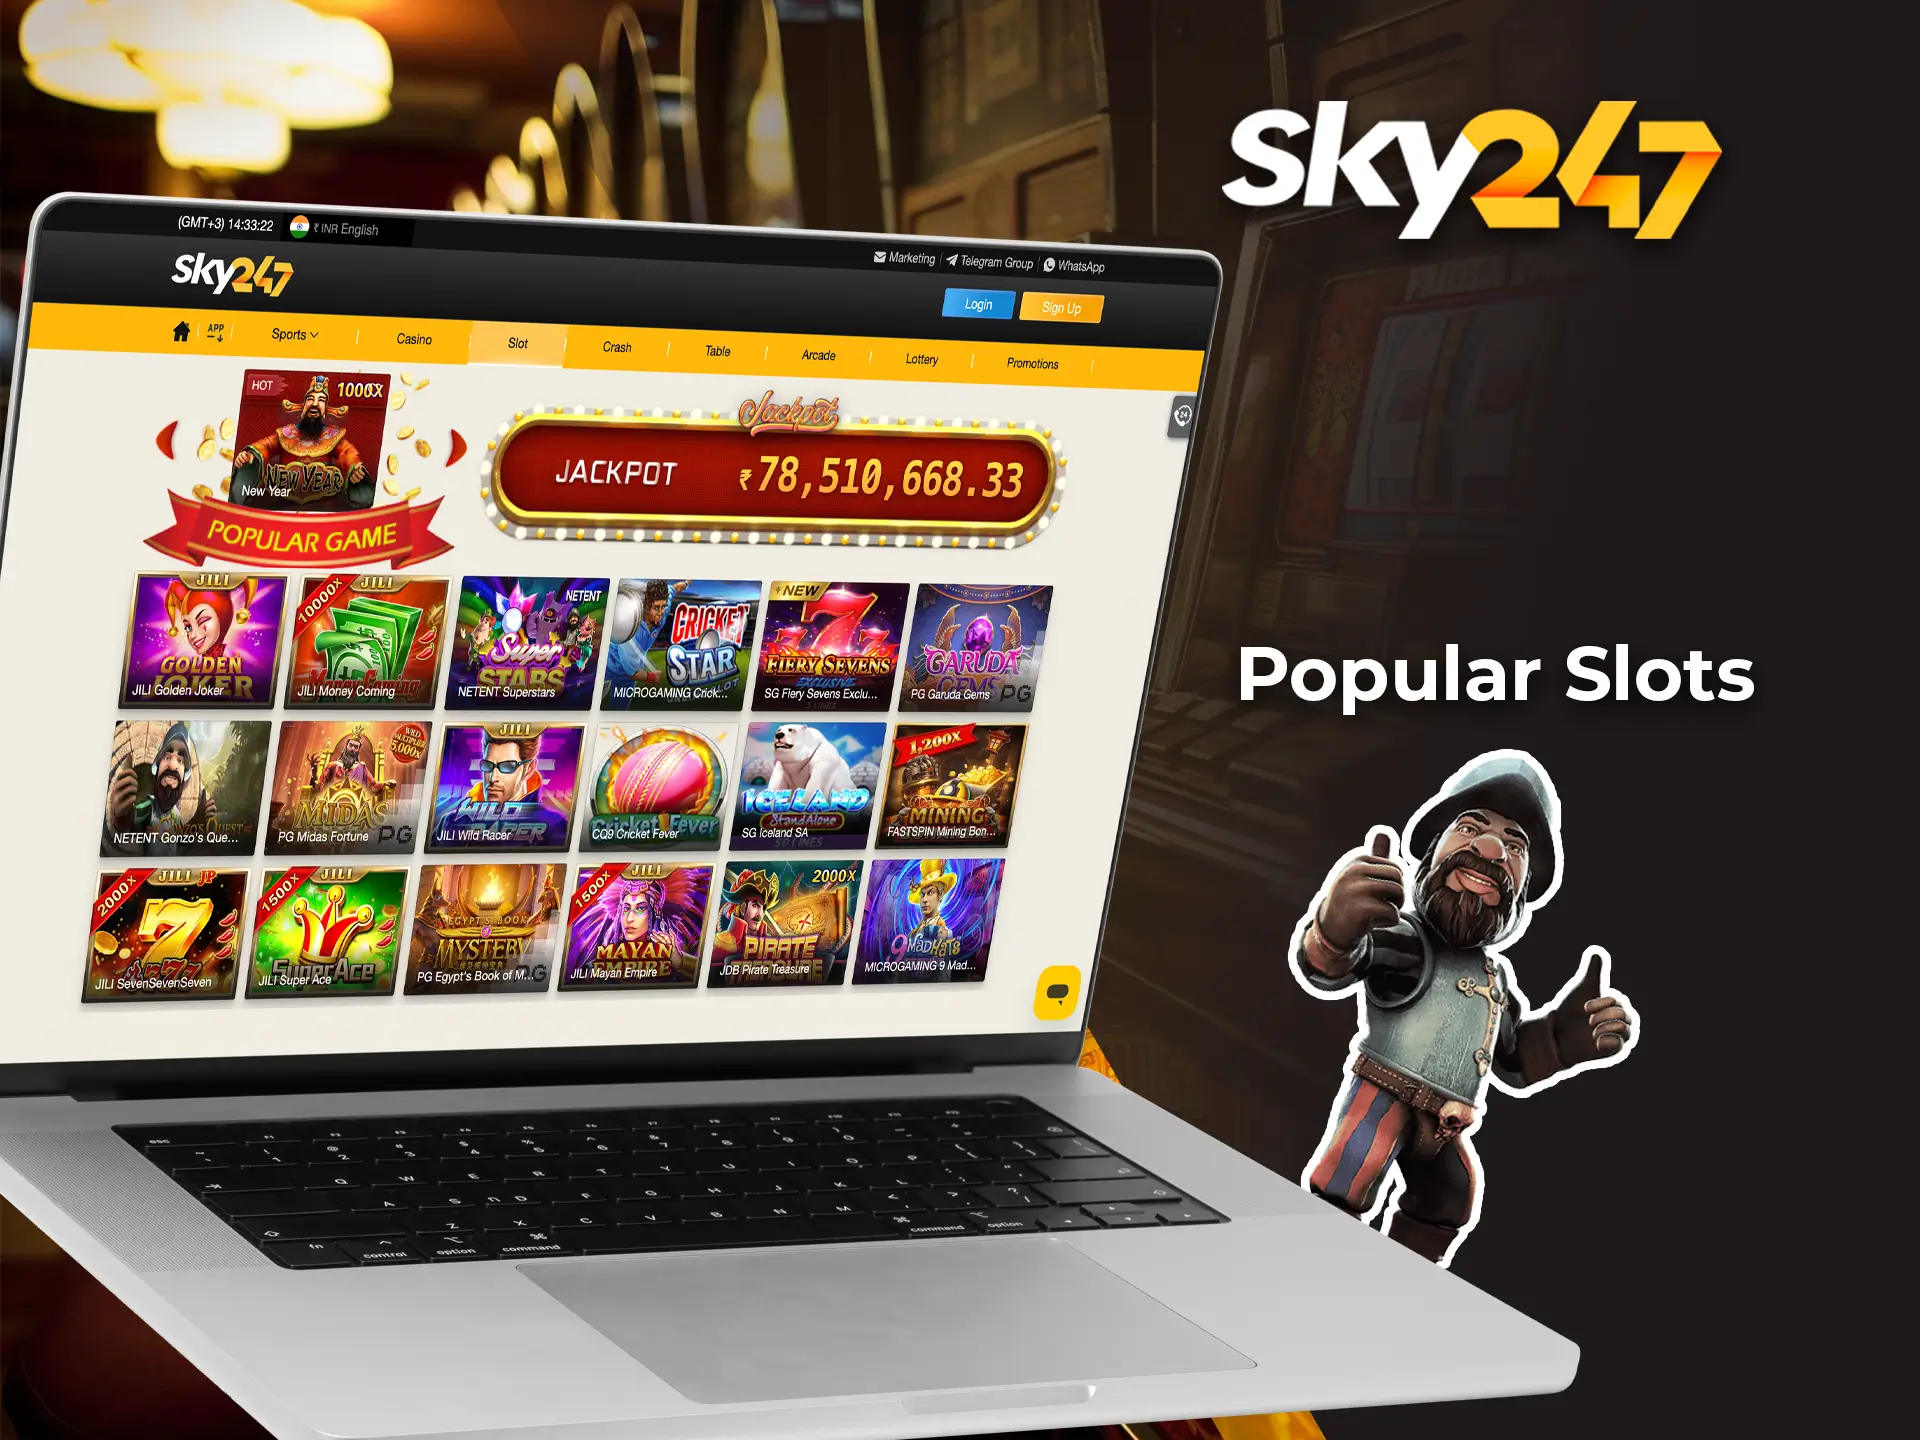 The most money-making and popular slots at Sky247 Casino are waiting for your bets.